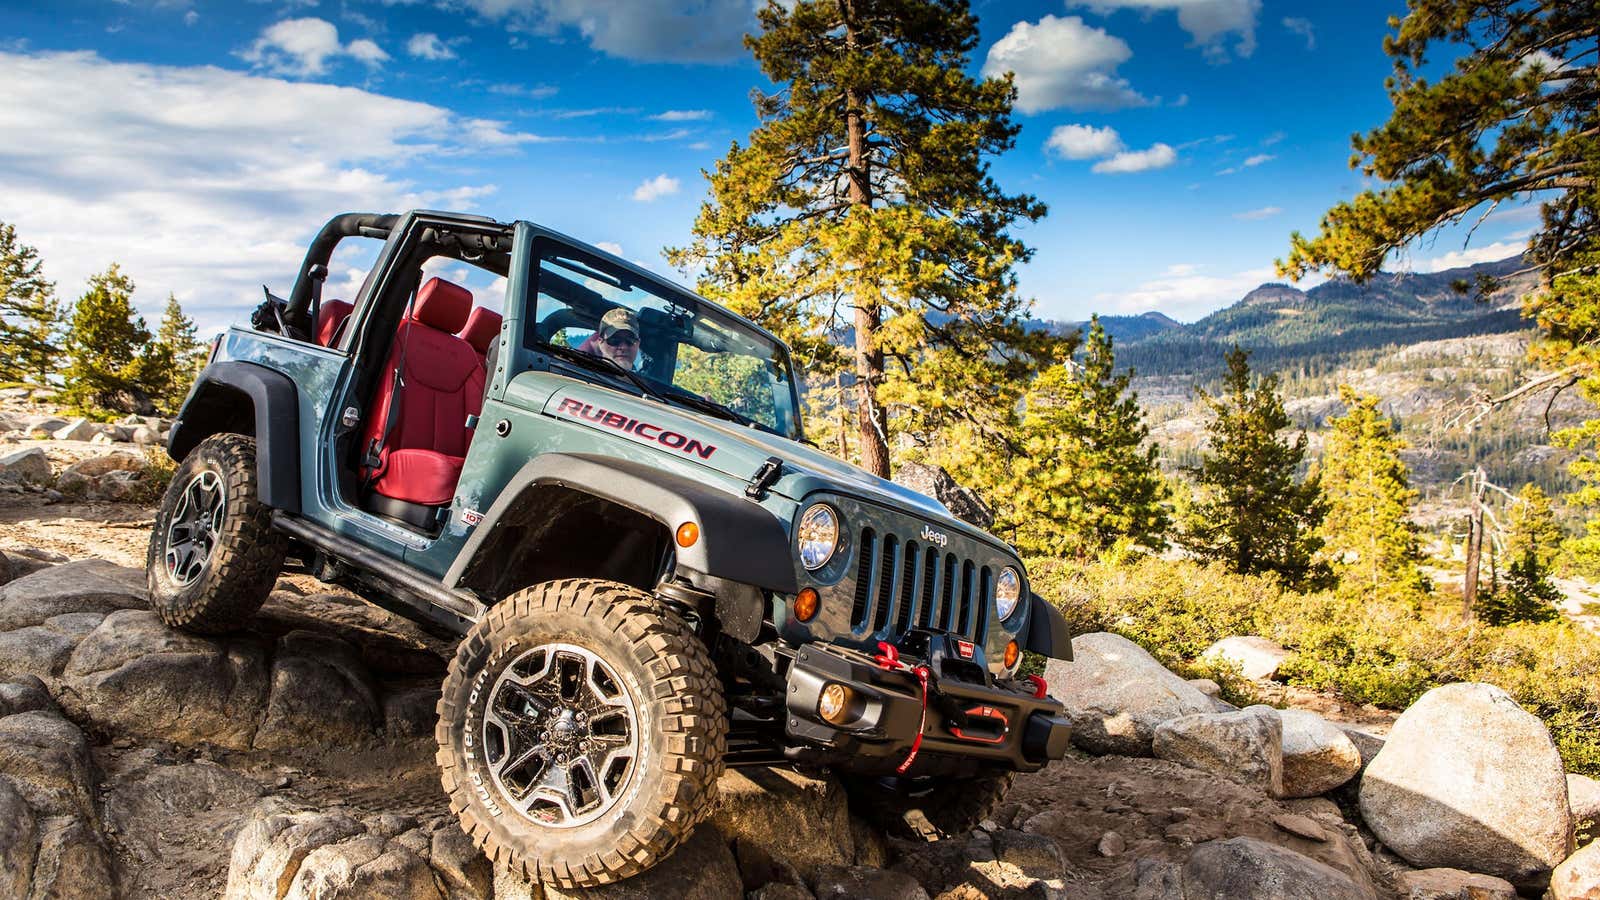 Big, burly cars like the Jeep Rubicon have been a hit in the US and in overseas markets